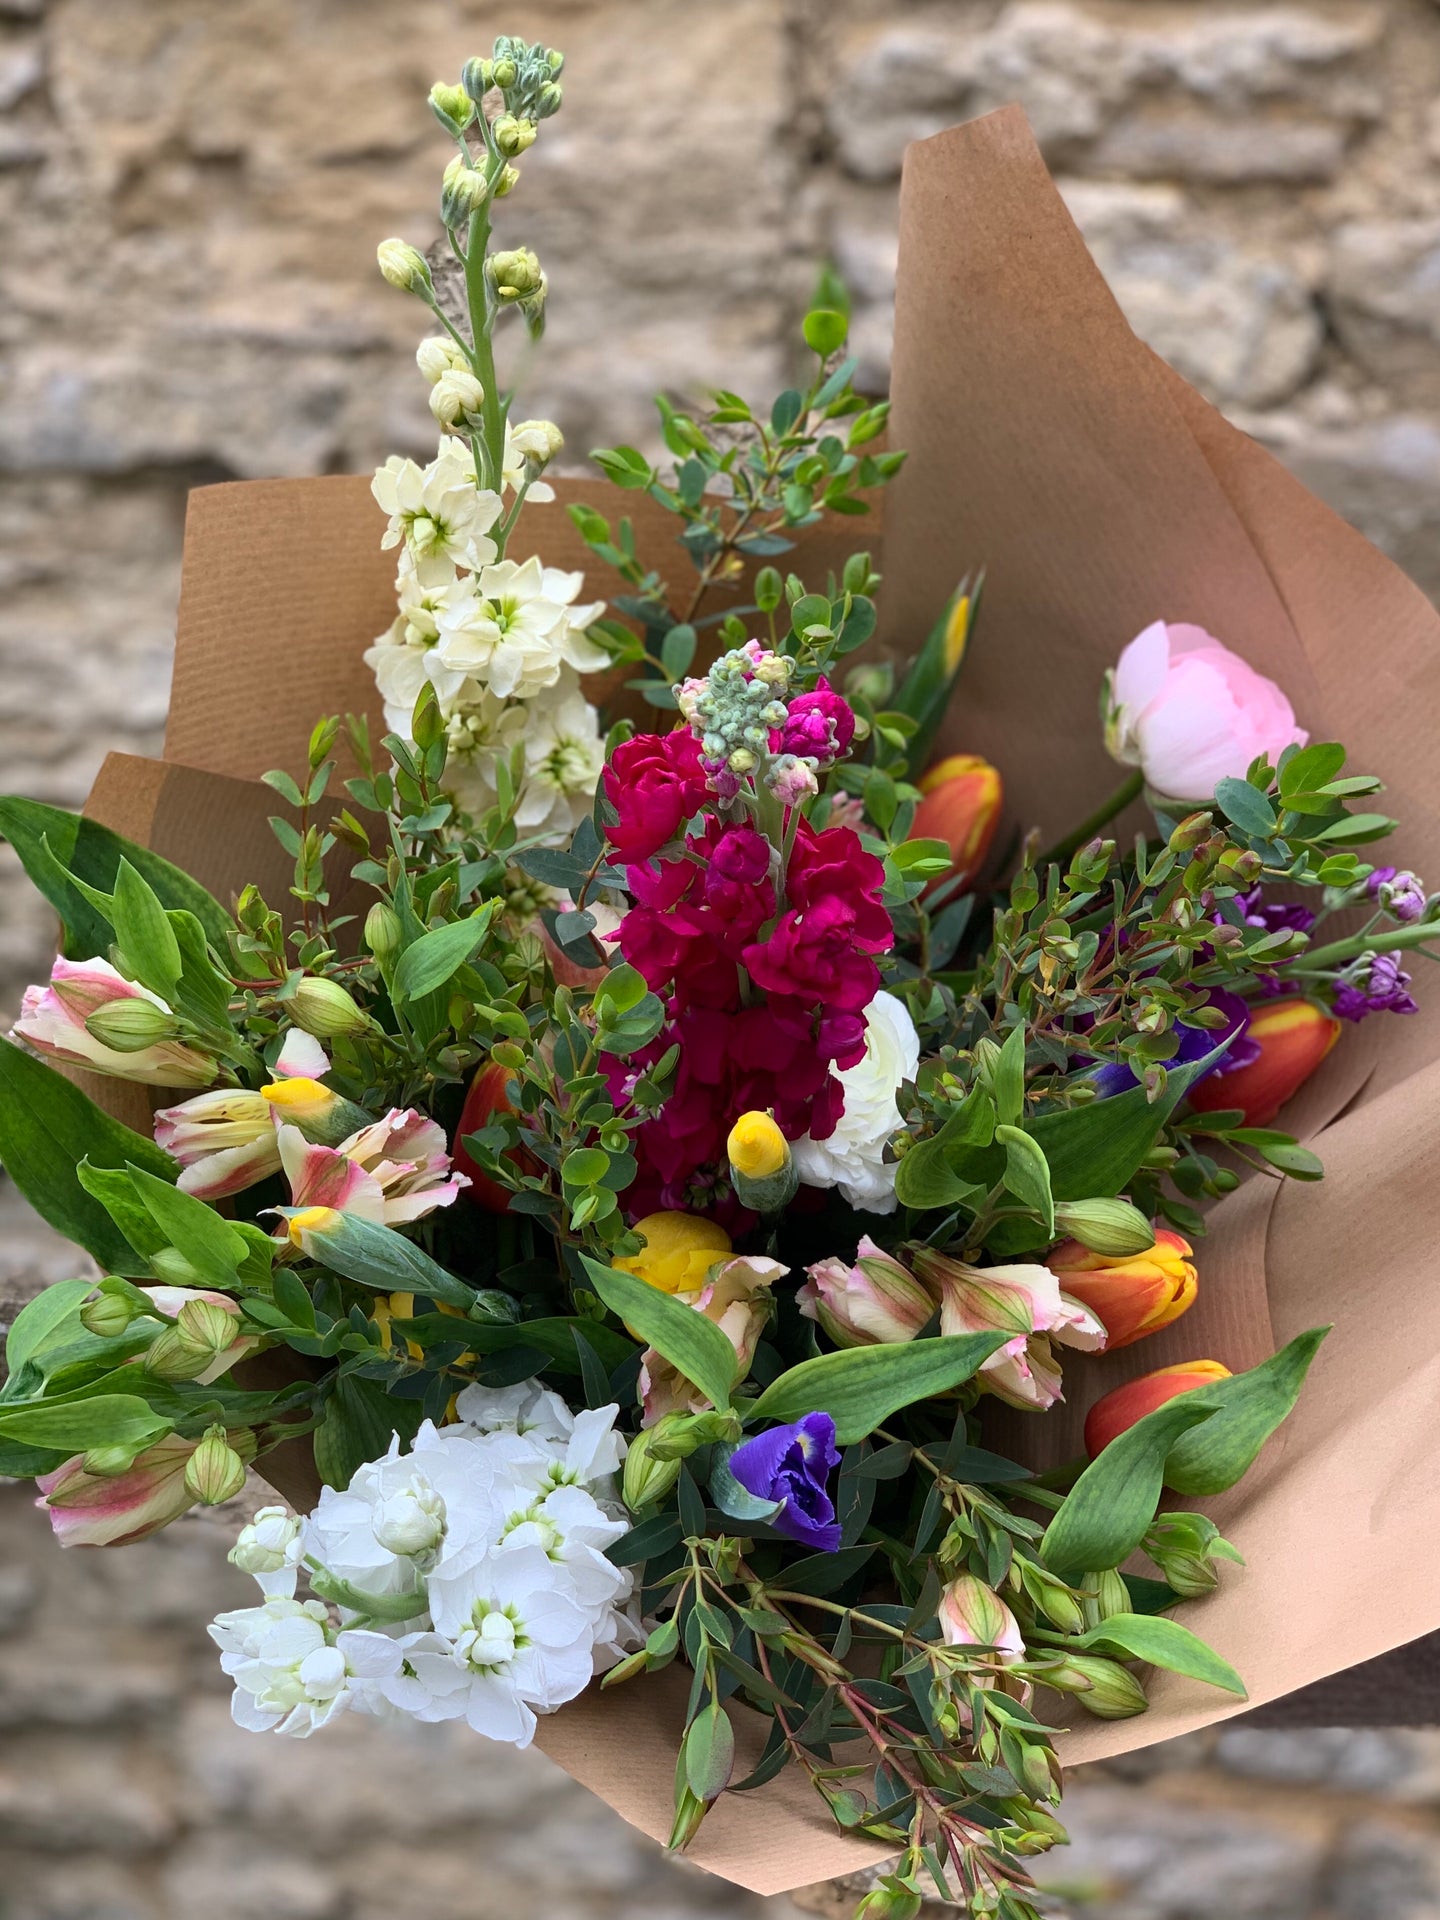 7/5/20 Mixed Spring Bouquet 100% British grown blooms